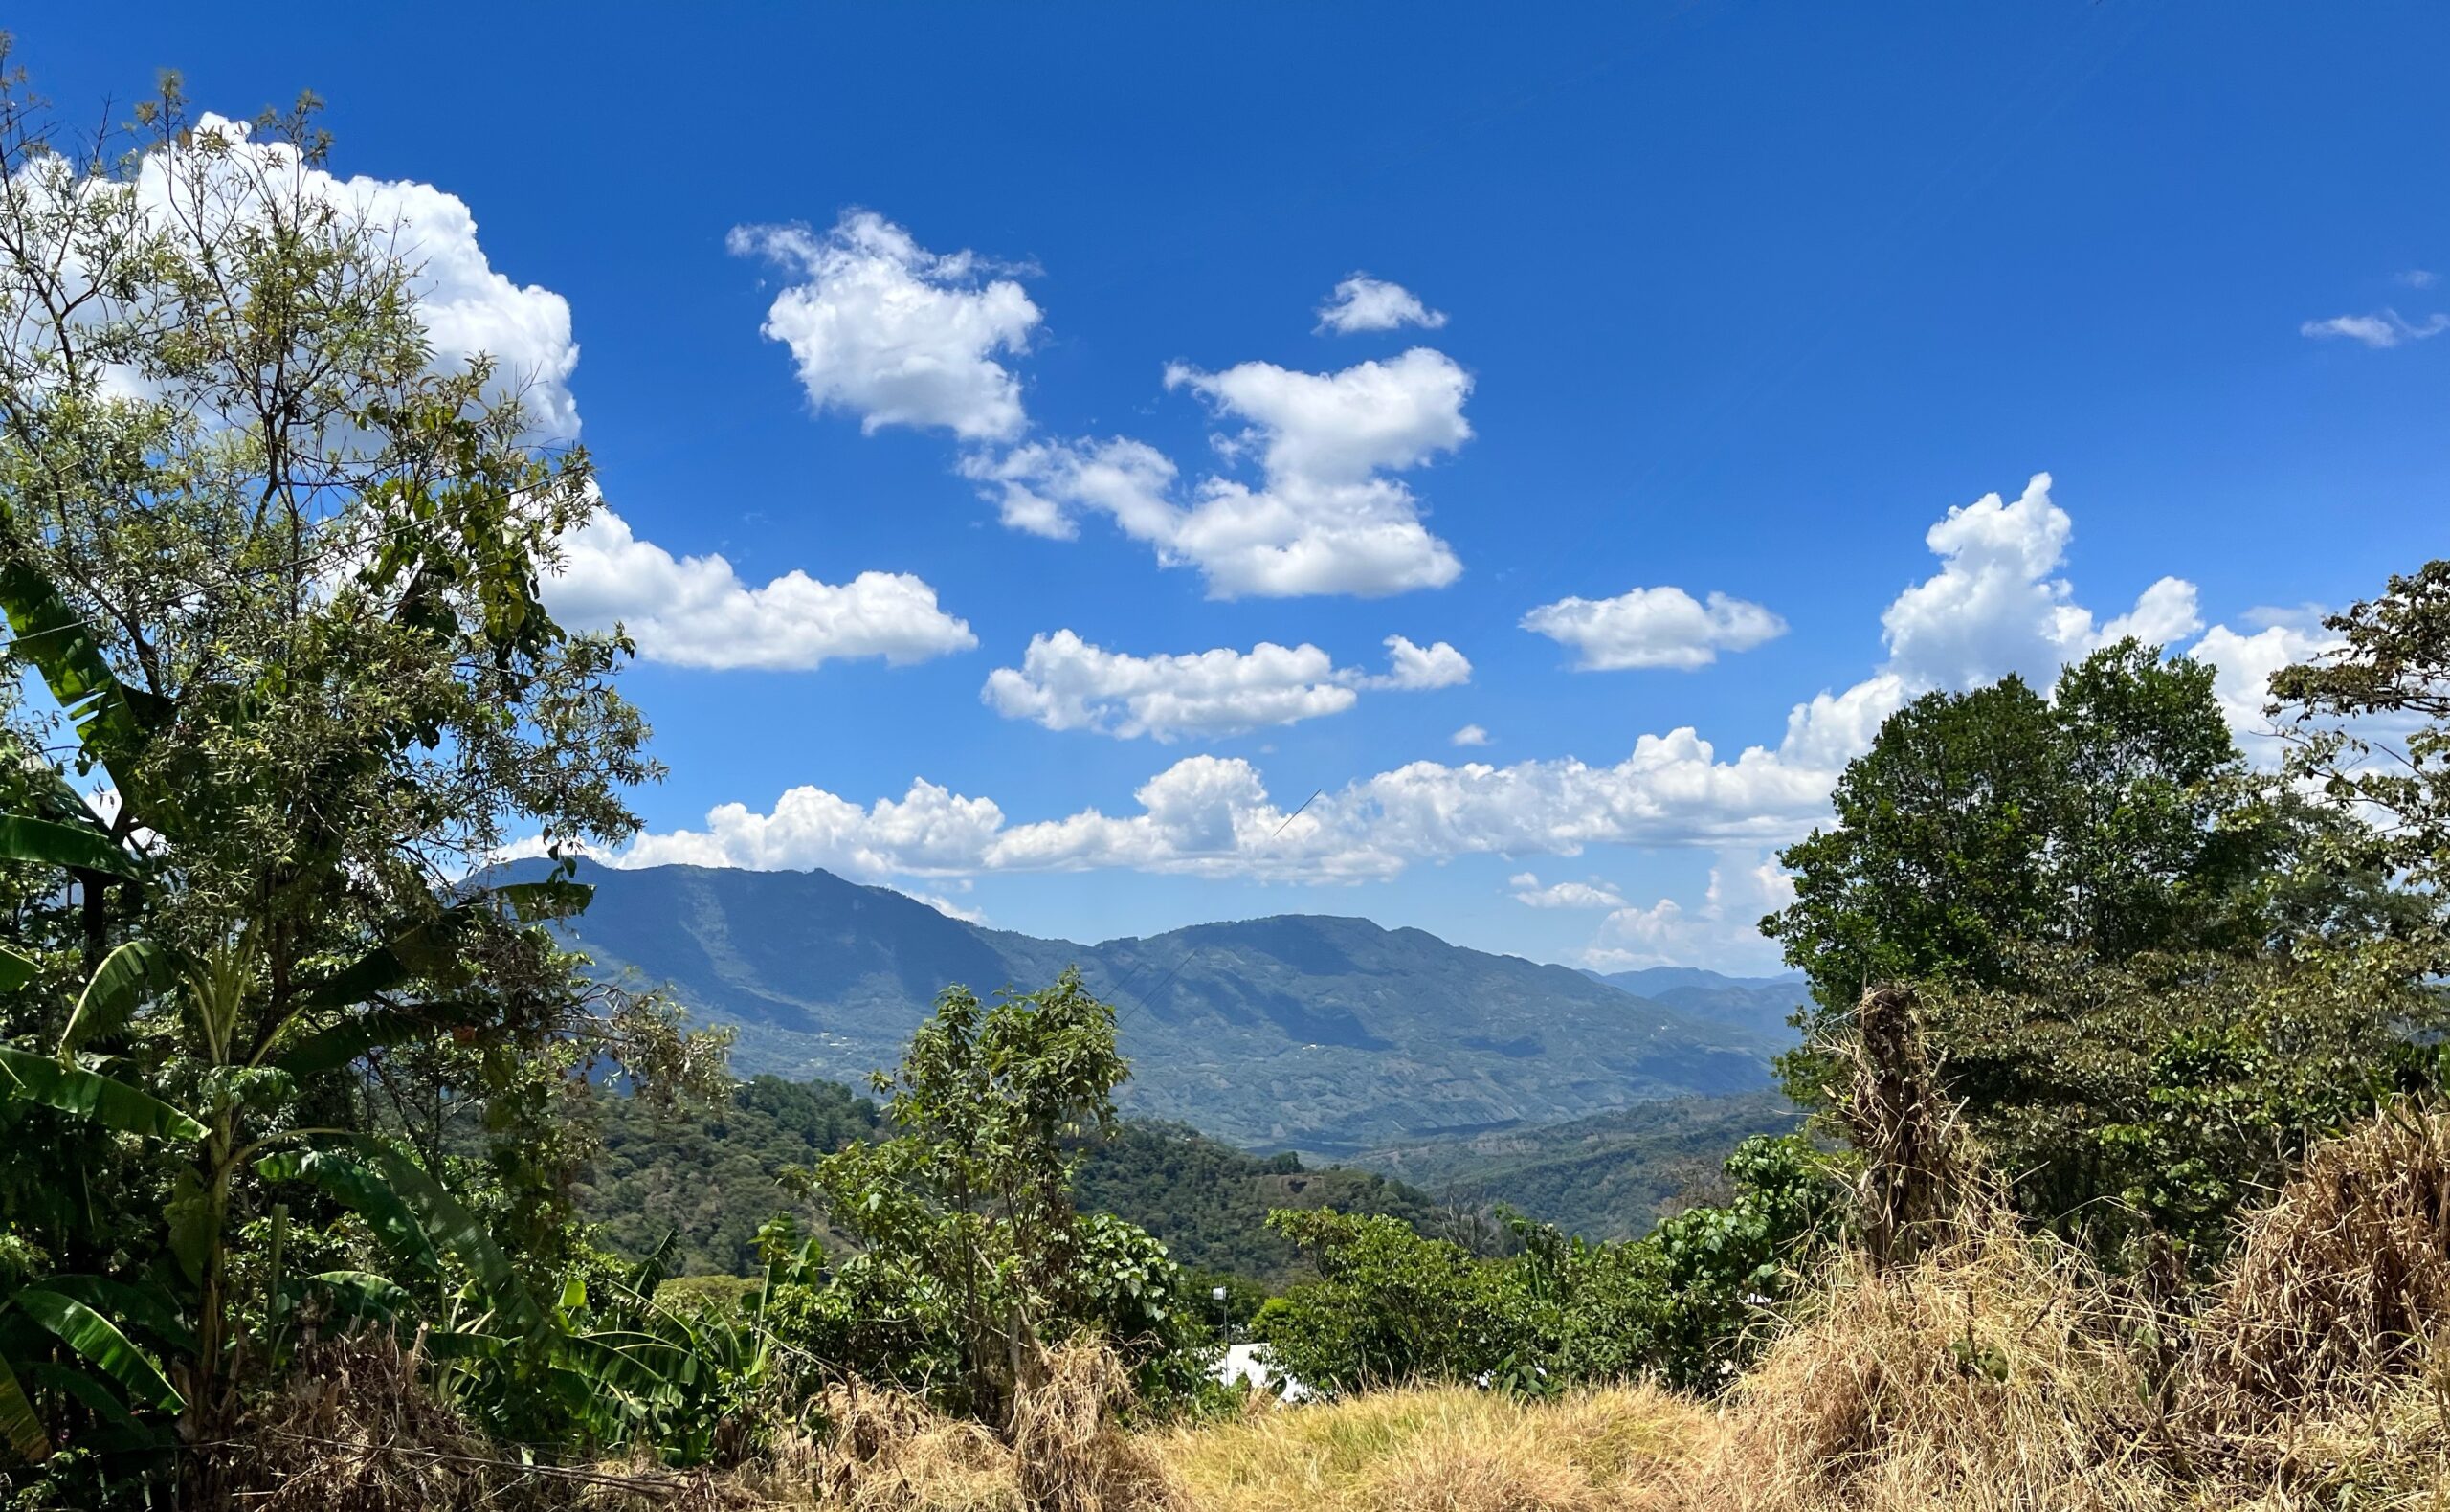 View overlooking Tenejapa Municipality in Chiapas, where Root Capital client Kulaktik is based. Credit: Root Capital